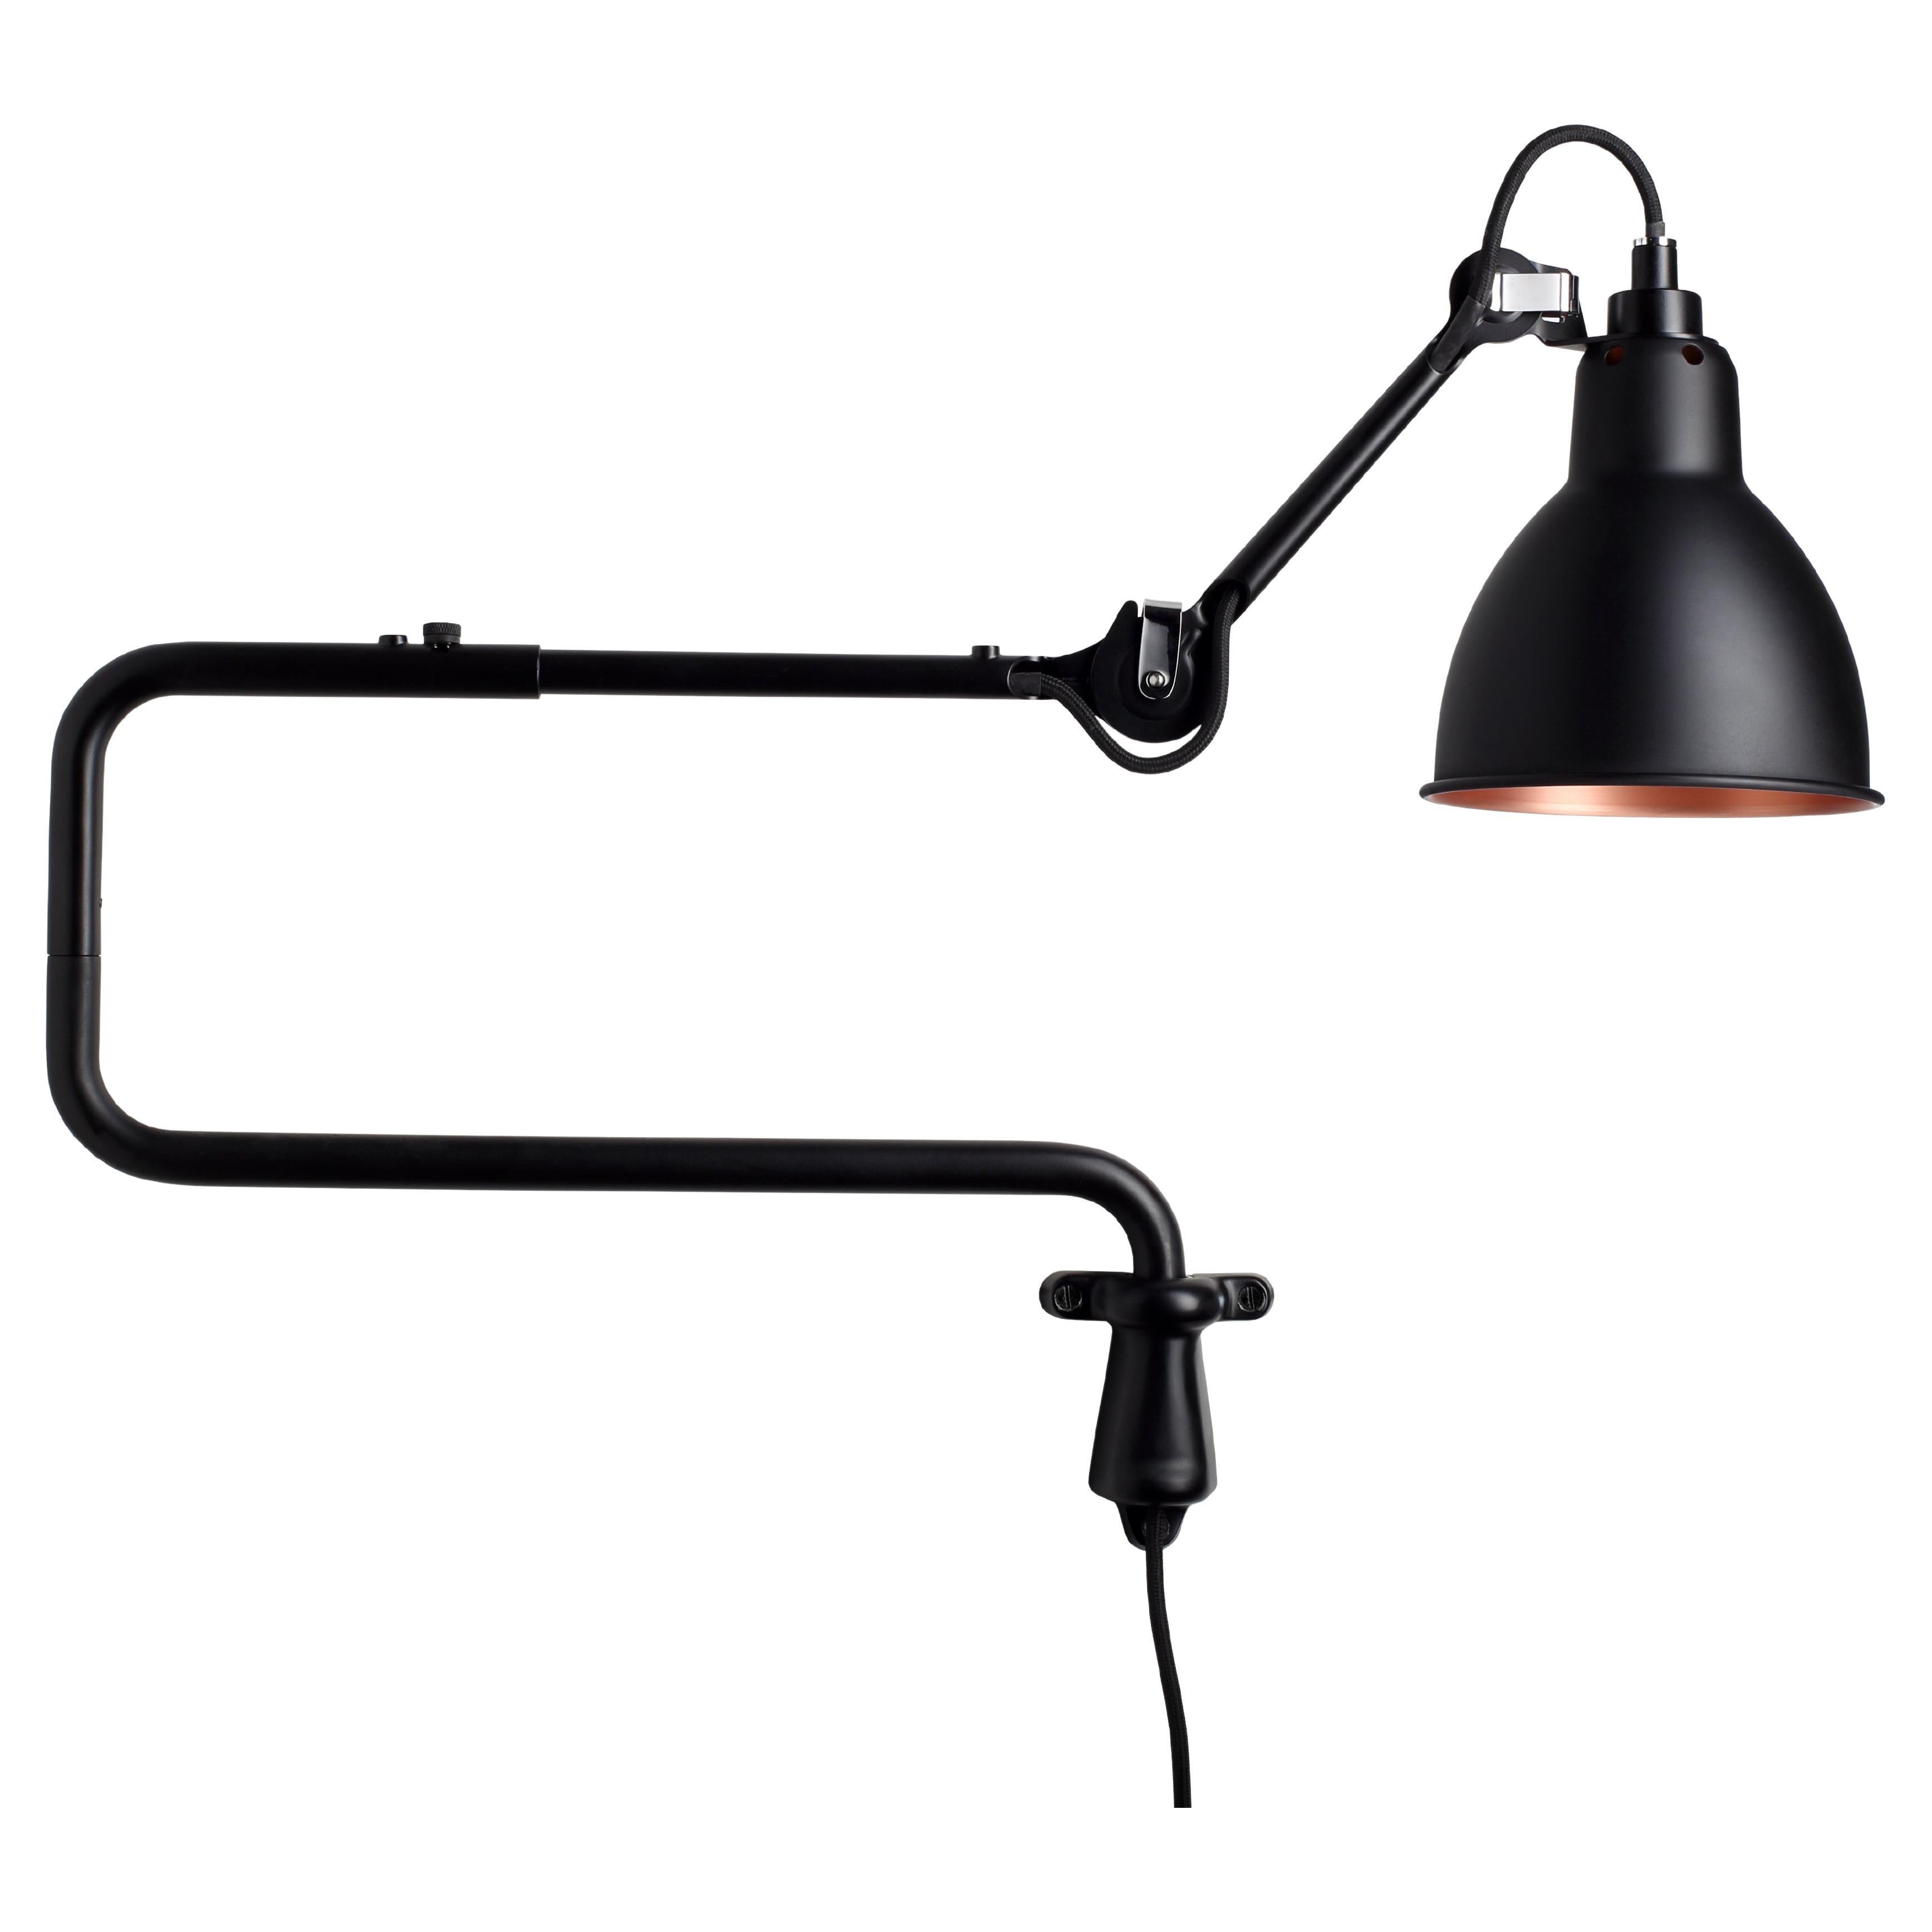 DCW Editions La Lampe Gras N°303 Wall Lamp in Black Arm and Black Copper Shade For Sale